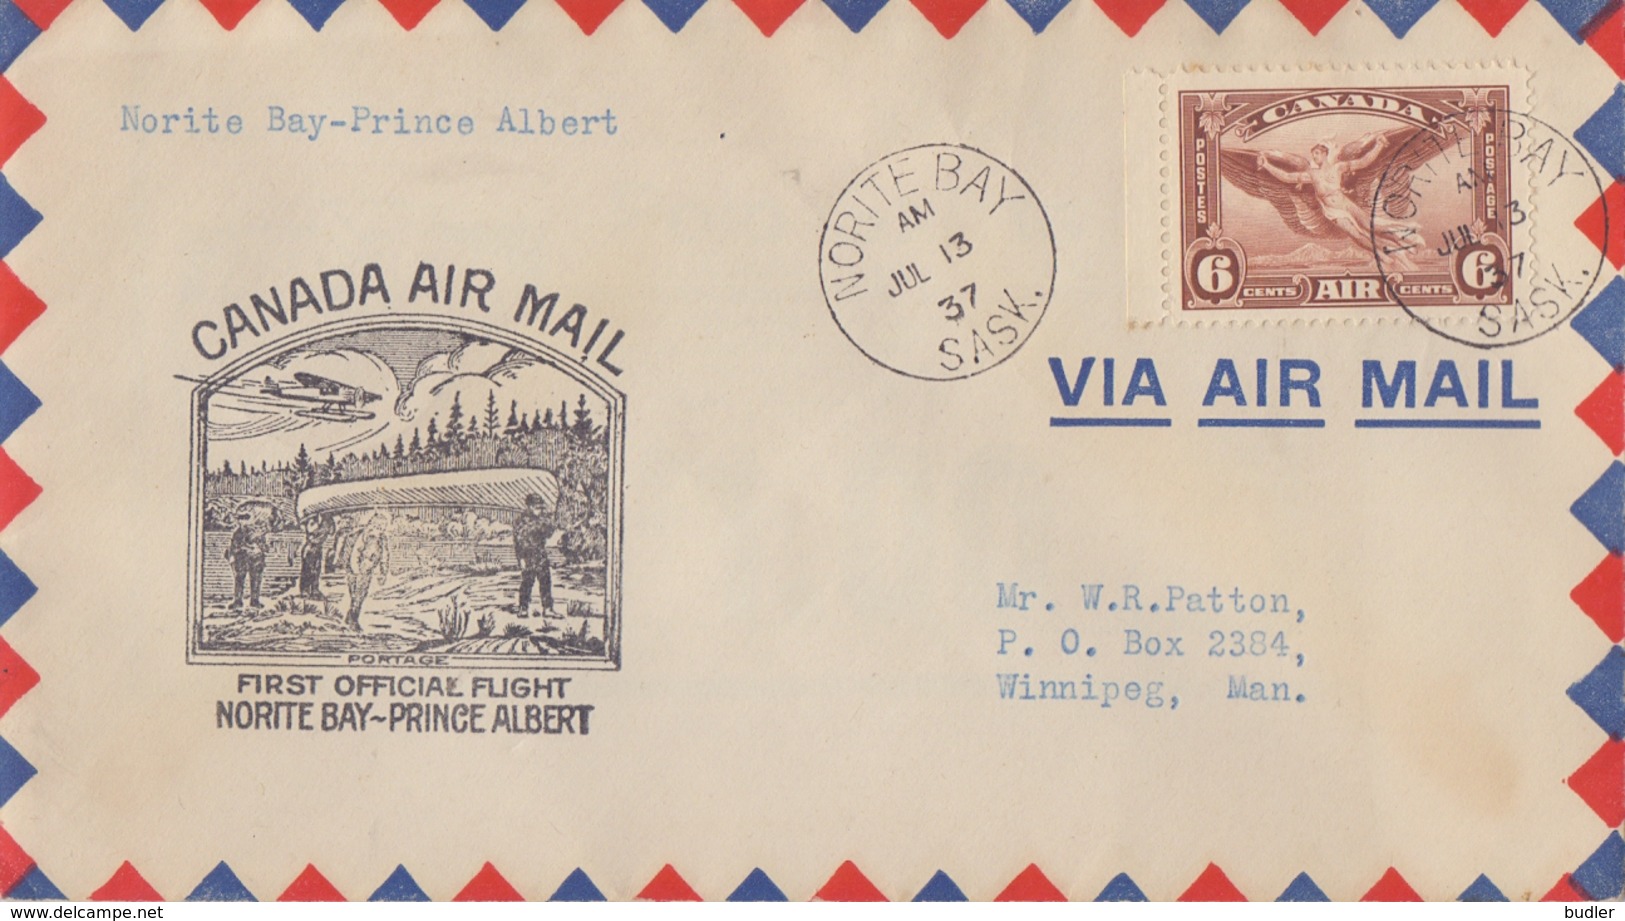 CANADA:1937:Travelled First Official Flight From NORITE BAY To PRINCE ALBERT: NAVIGATION,ROWING,AVIATION,AIR MAIL,ICARUS - First Flight Covers